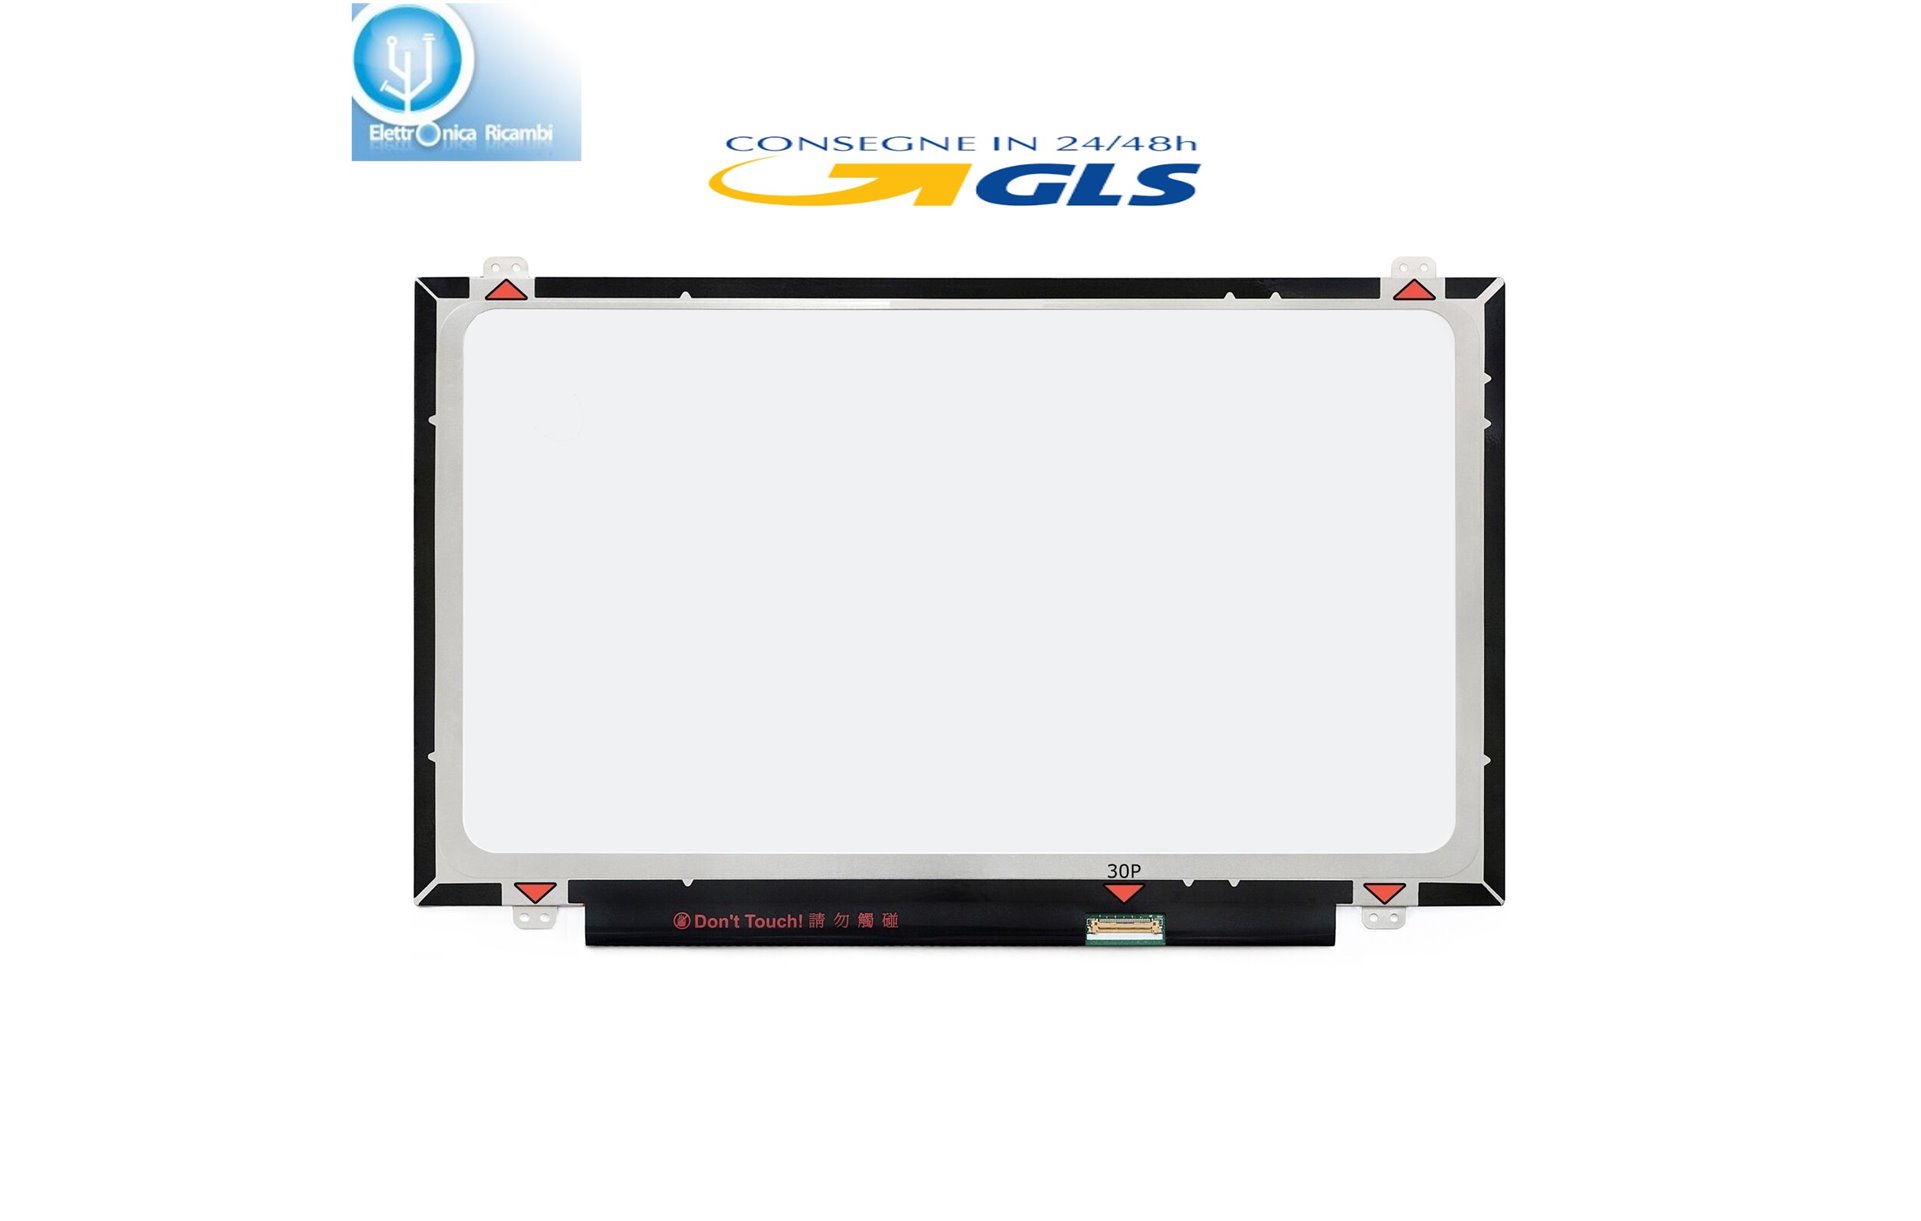 Display LCD Schermo Acer ASPIRE 5 A514-51G SERIES 14.0 LED SLIM 30 pin HD (1366x768)